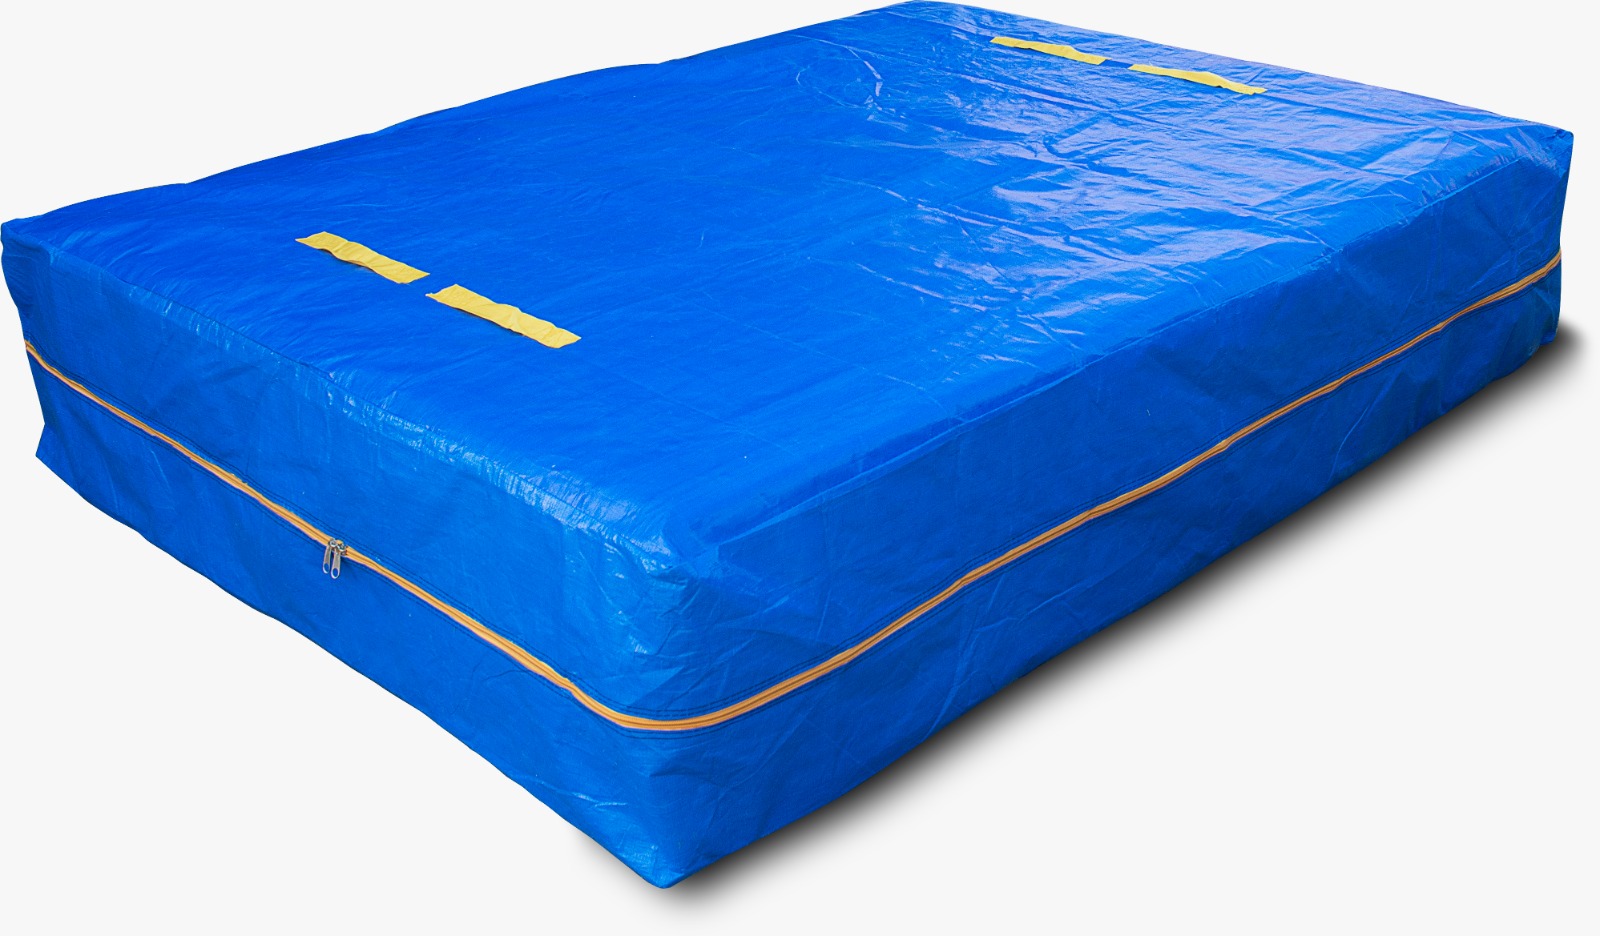 king mattress bag for moving with handles